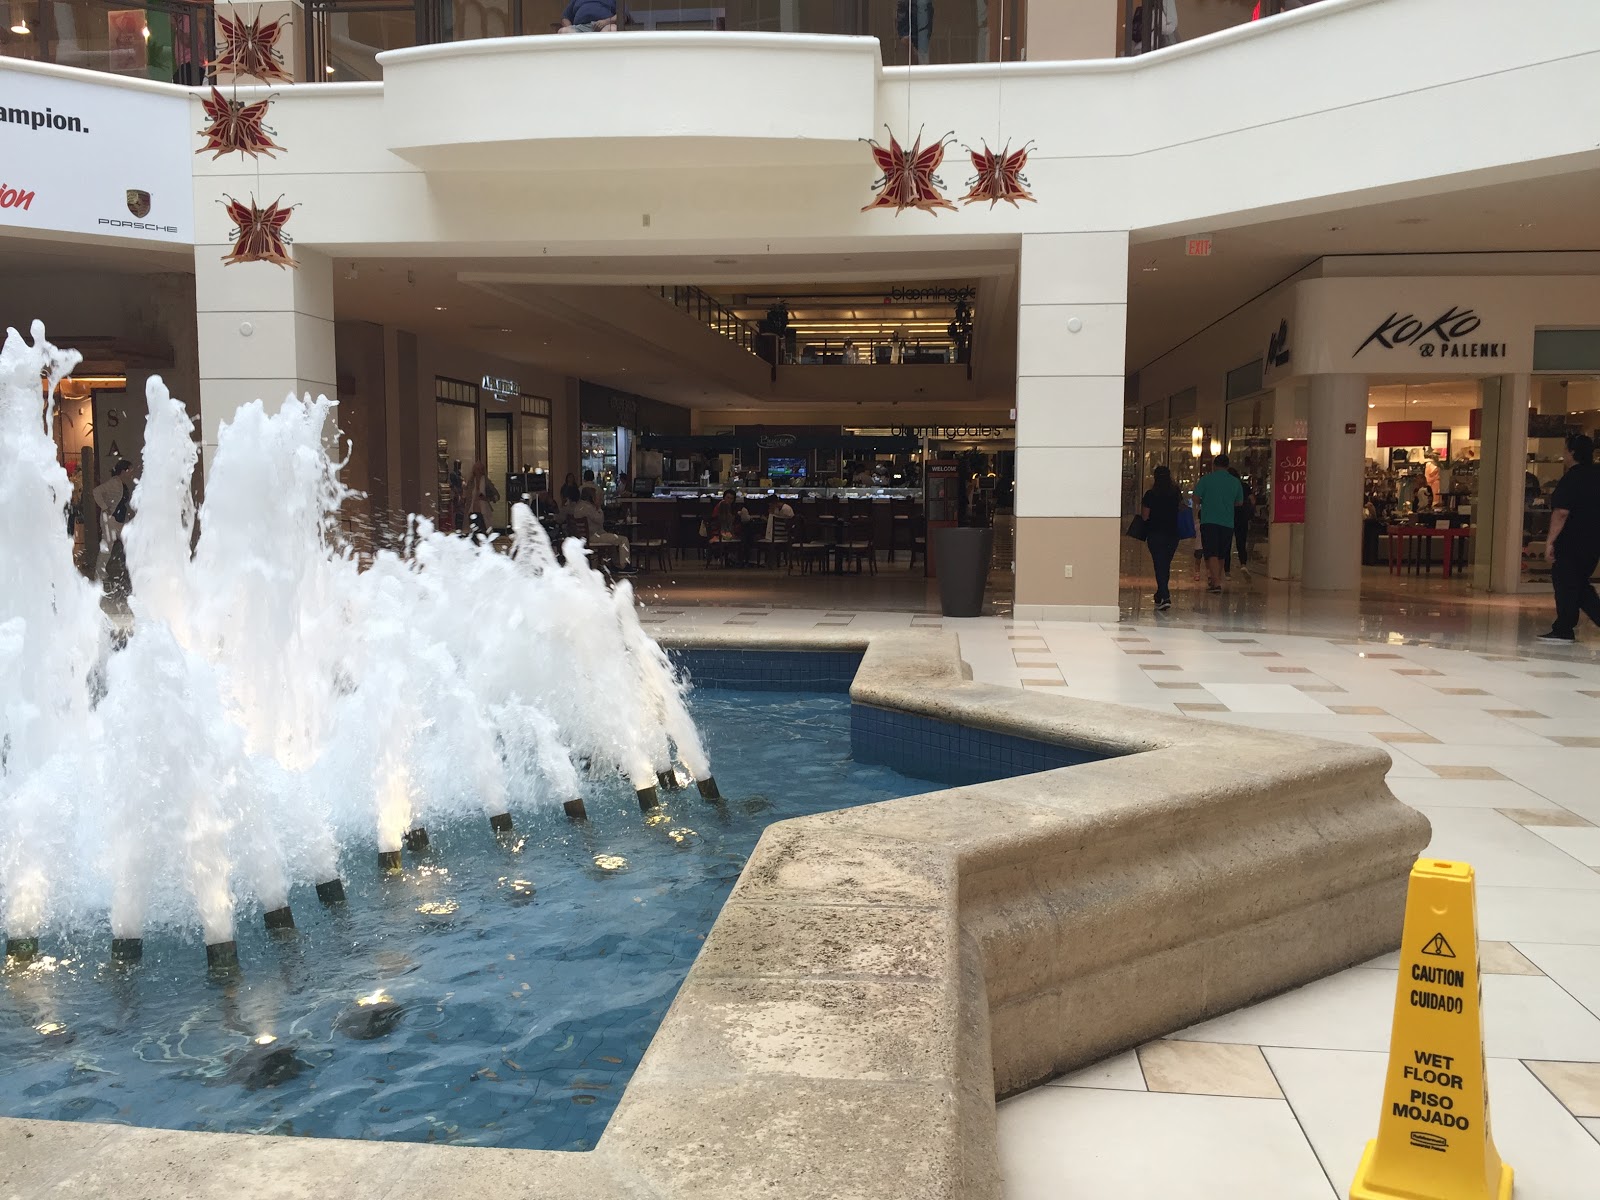 Sawgrass Mills or Aventura Mall: Which Mall is Better? - Travel Mend